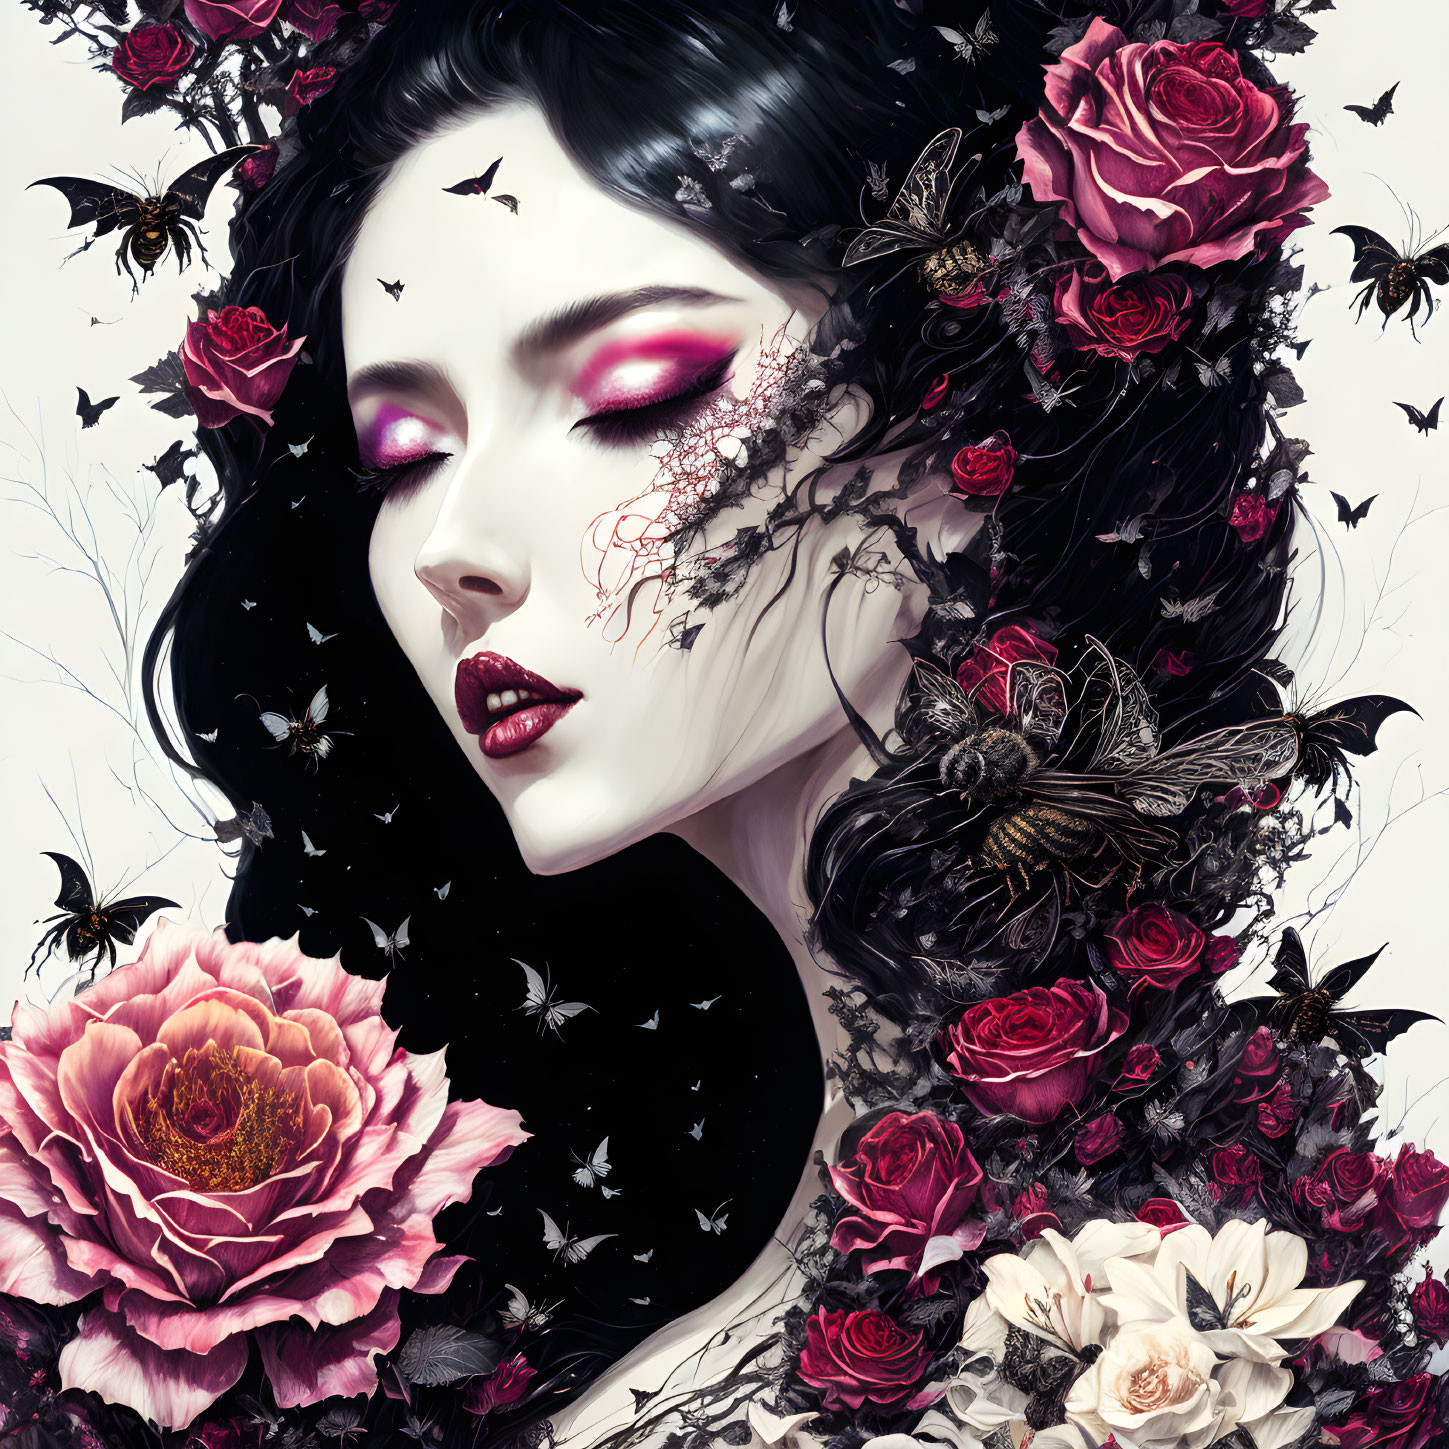 Digital Artwork: Woman with Dark Hair, Roses, and Insects in Gothic Fantasy Theme